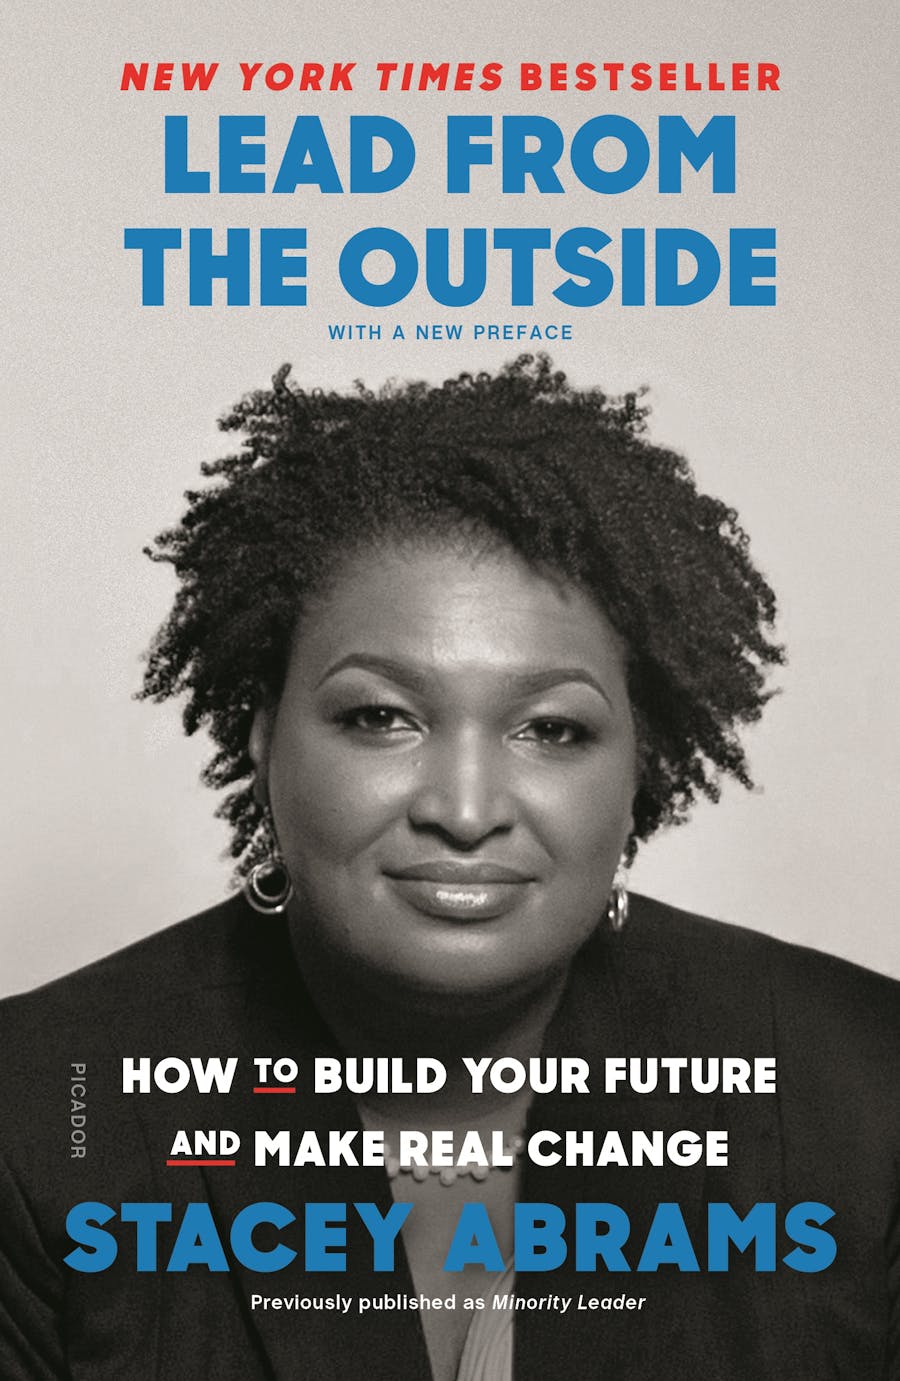 Lead from the Outside by Stacey Abrams